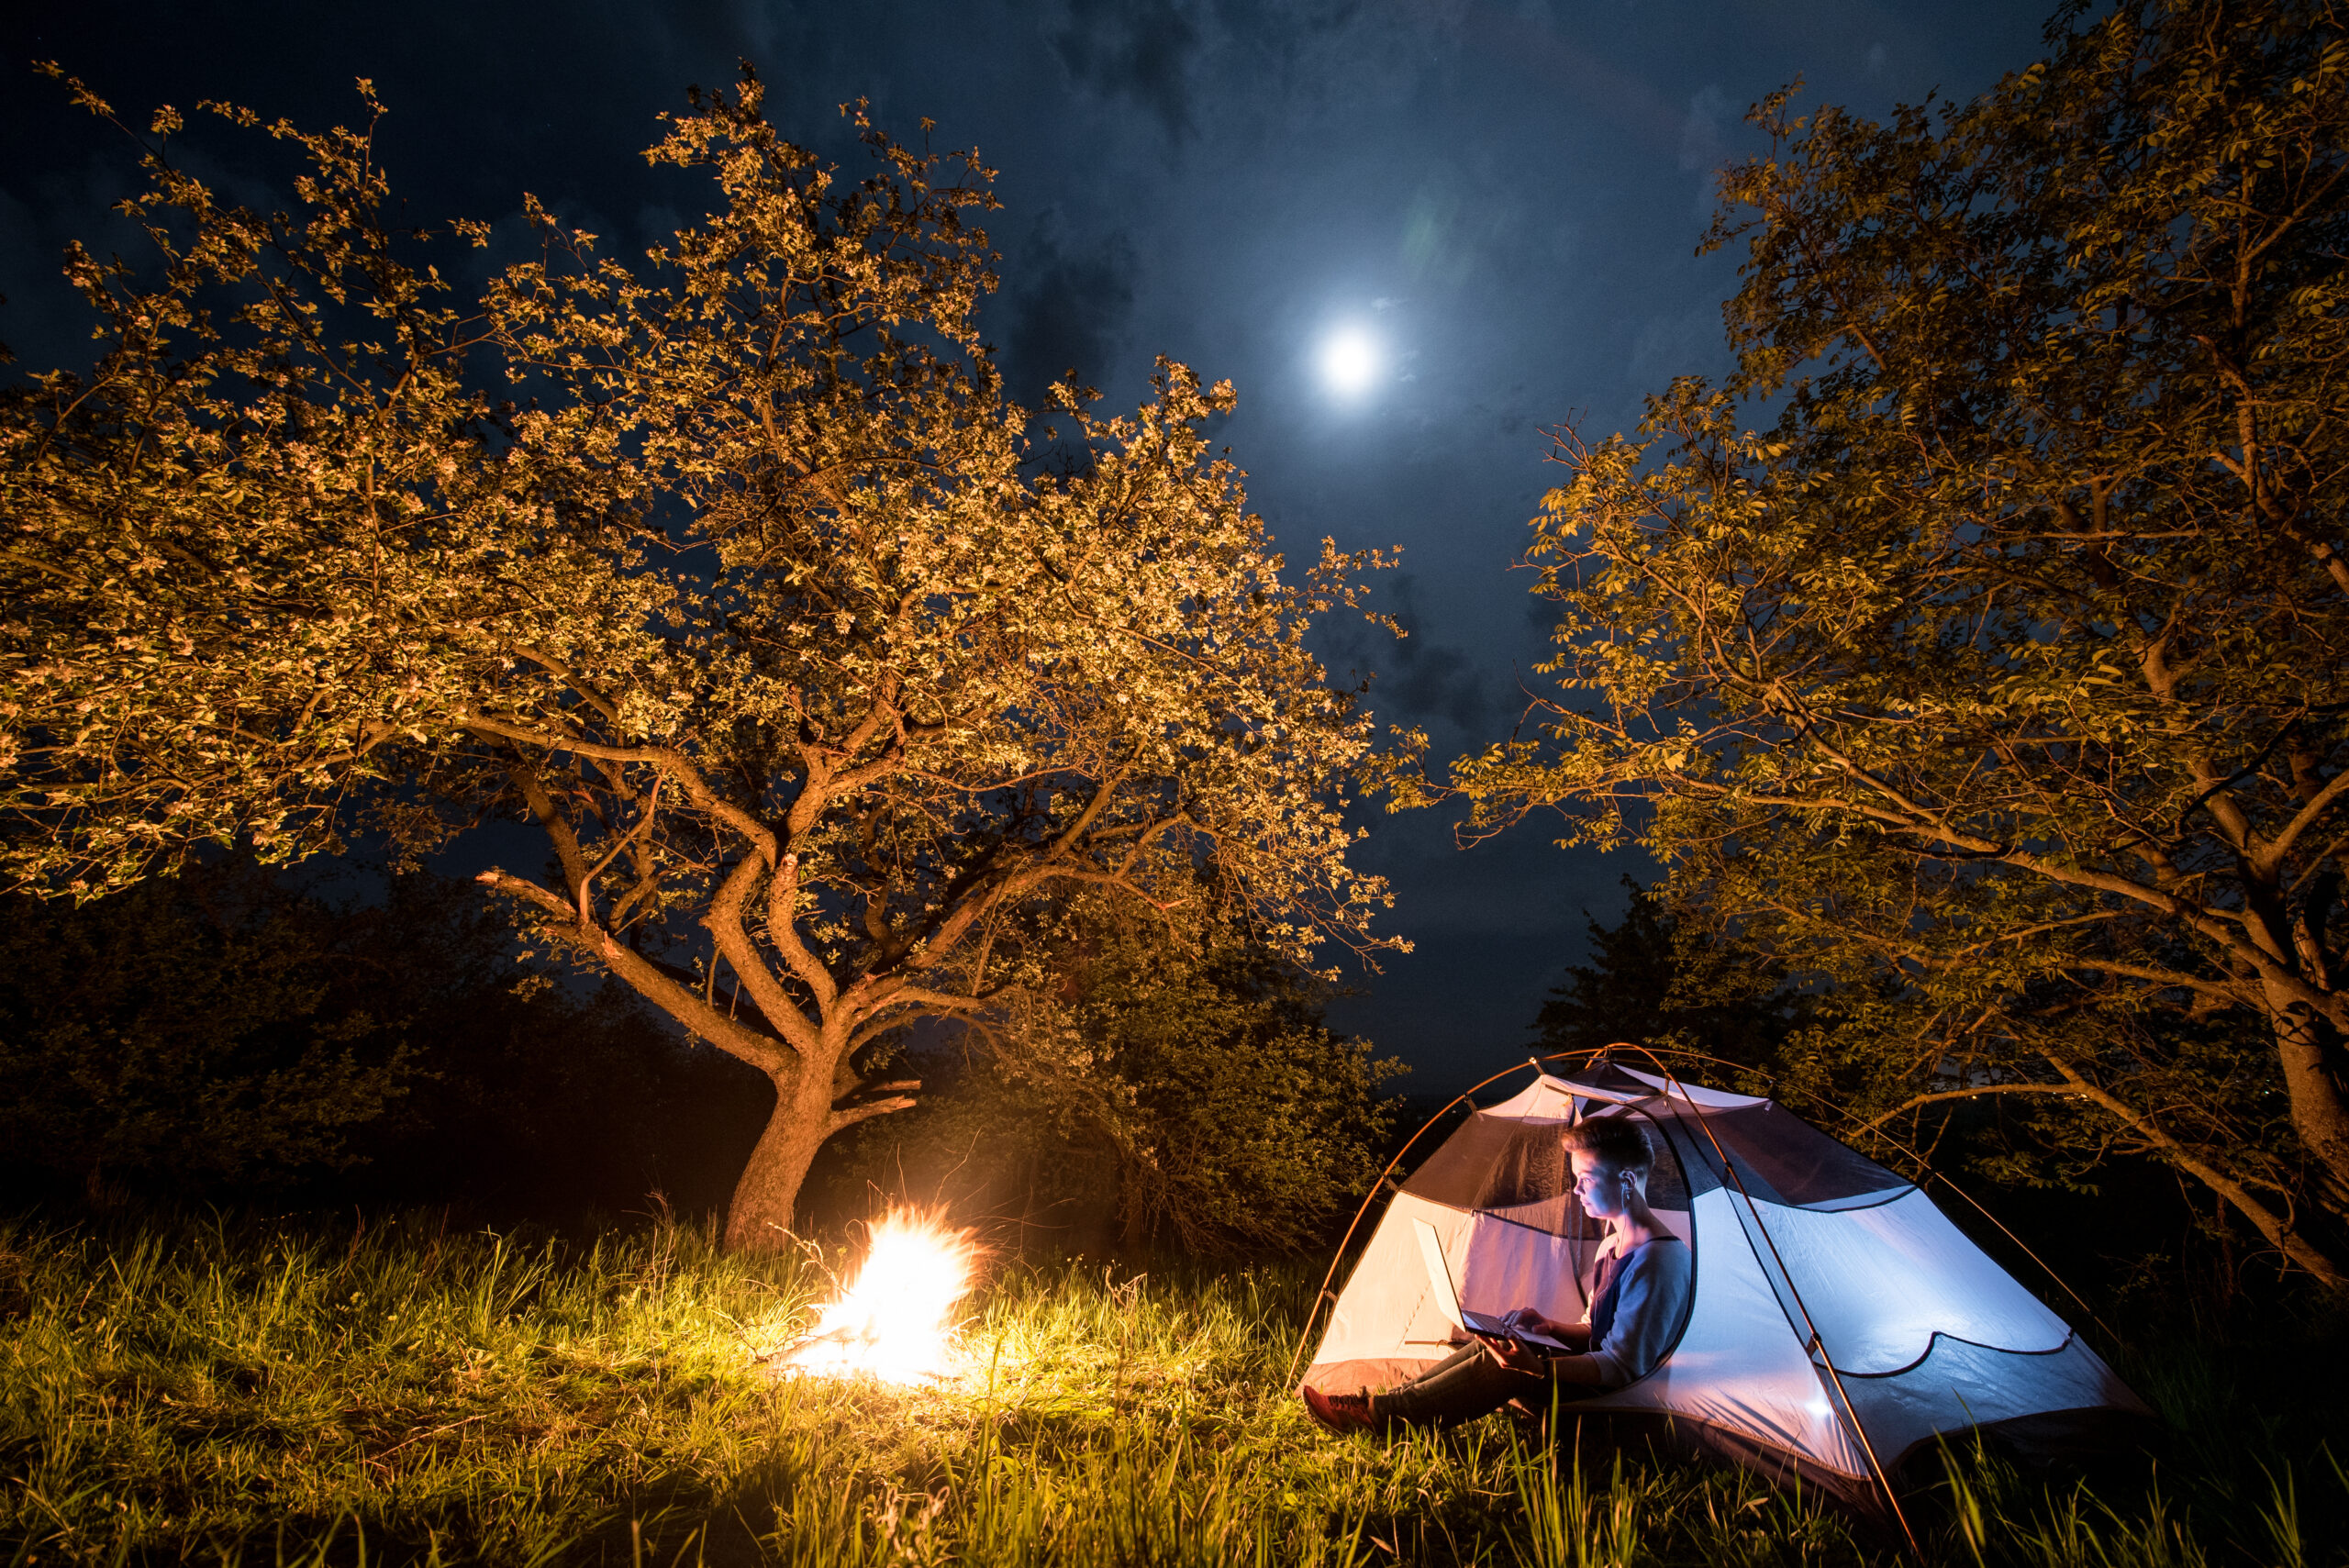 Female tourist using her laptop in the camping at night. Woman sitting near campfire and tent under trees and night sky with the moon